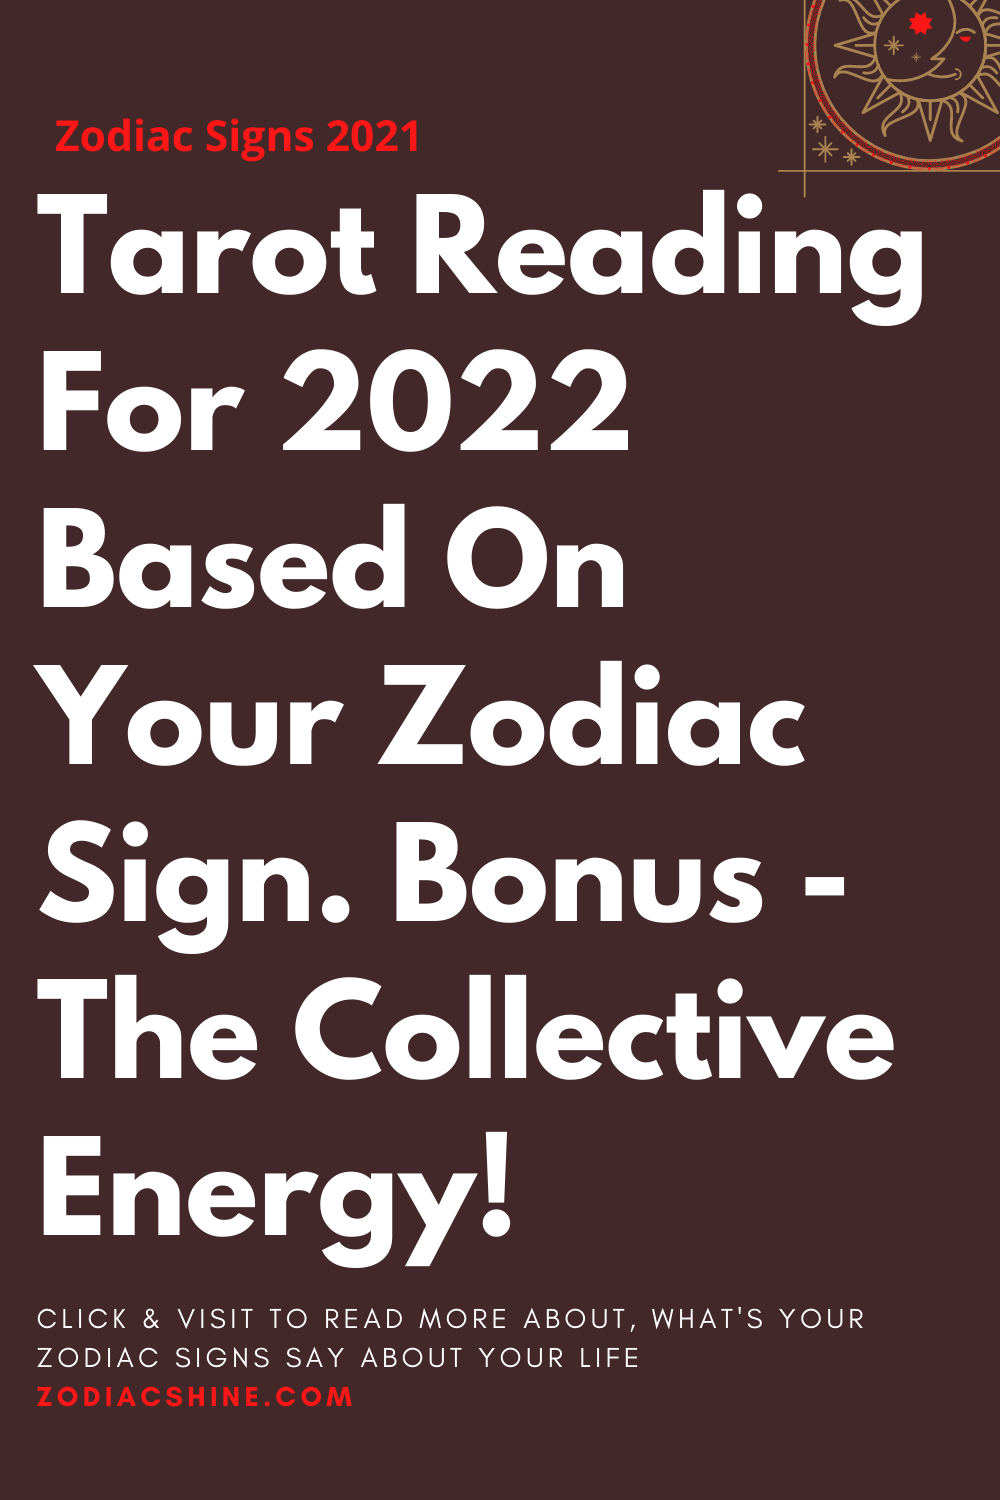 Tarot Reading For 2022 Based On Your Zodiac Sign. Bonus - The Collective Energy!